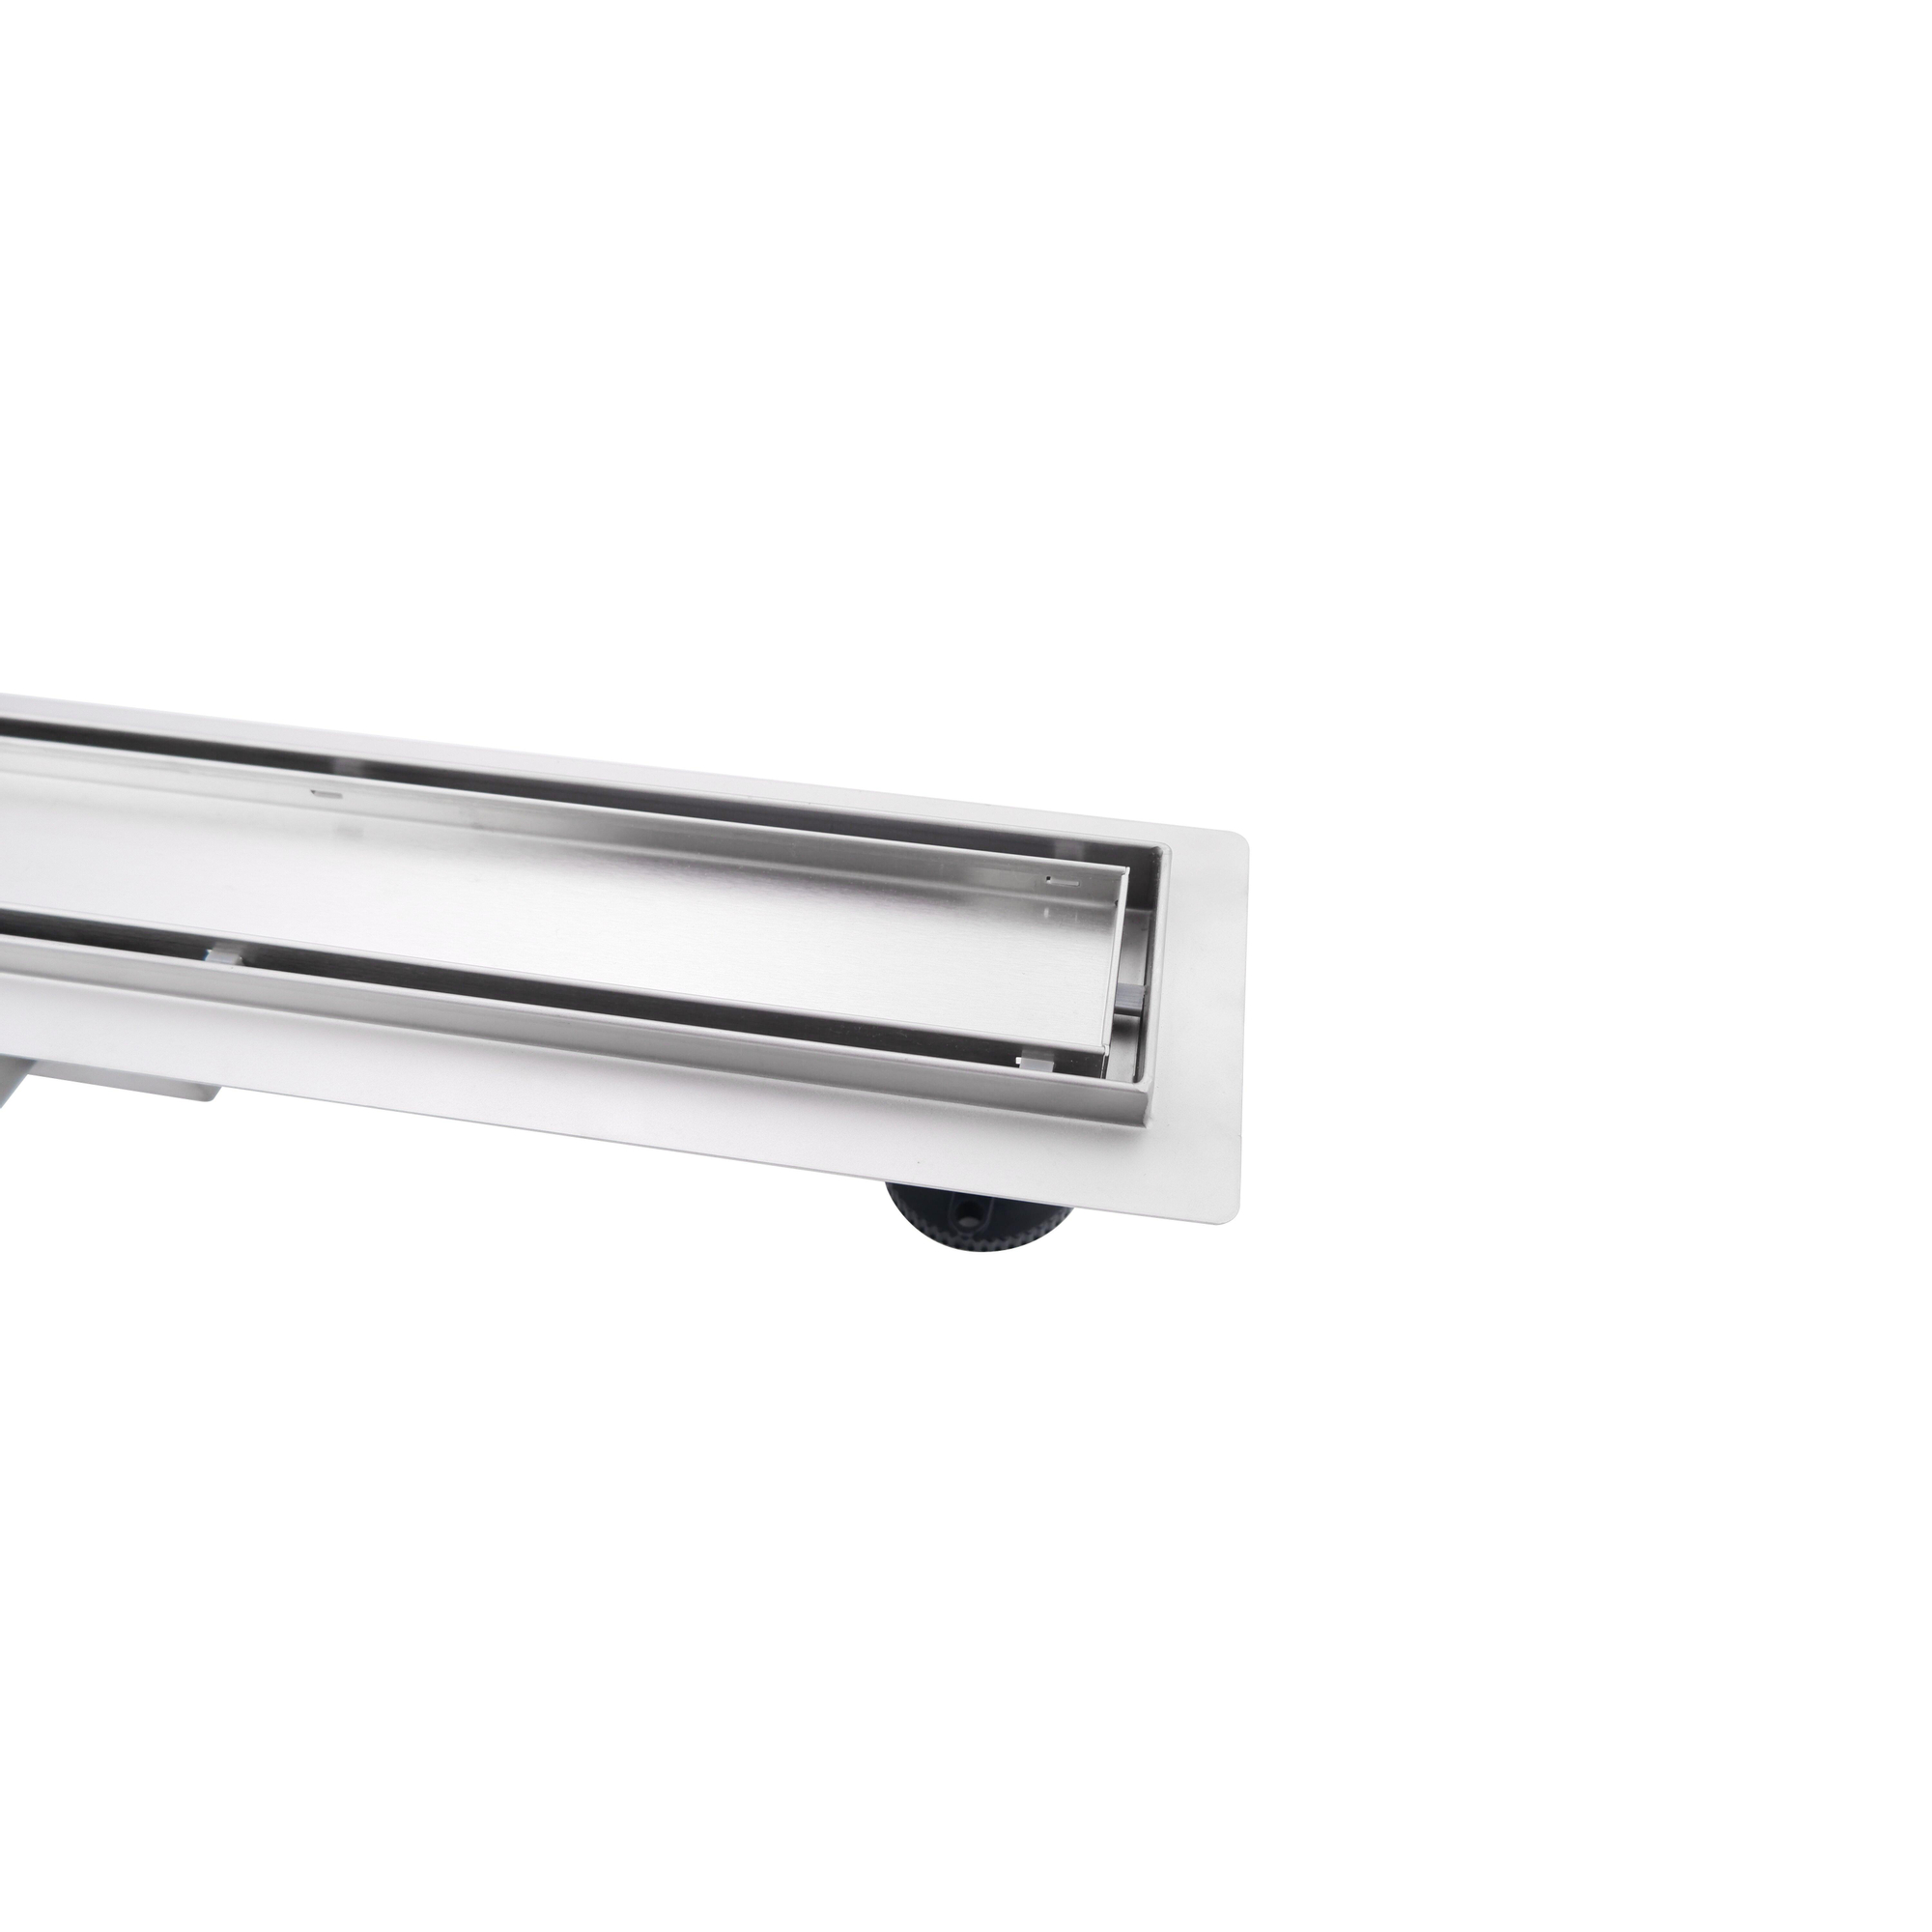 Grille douche angulaire, Inda collection Hotellerie